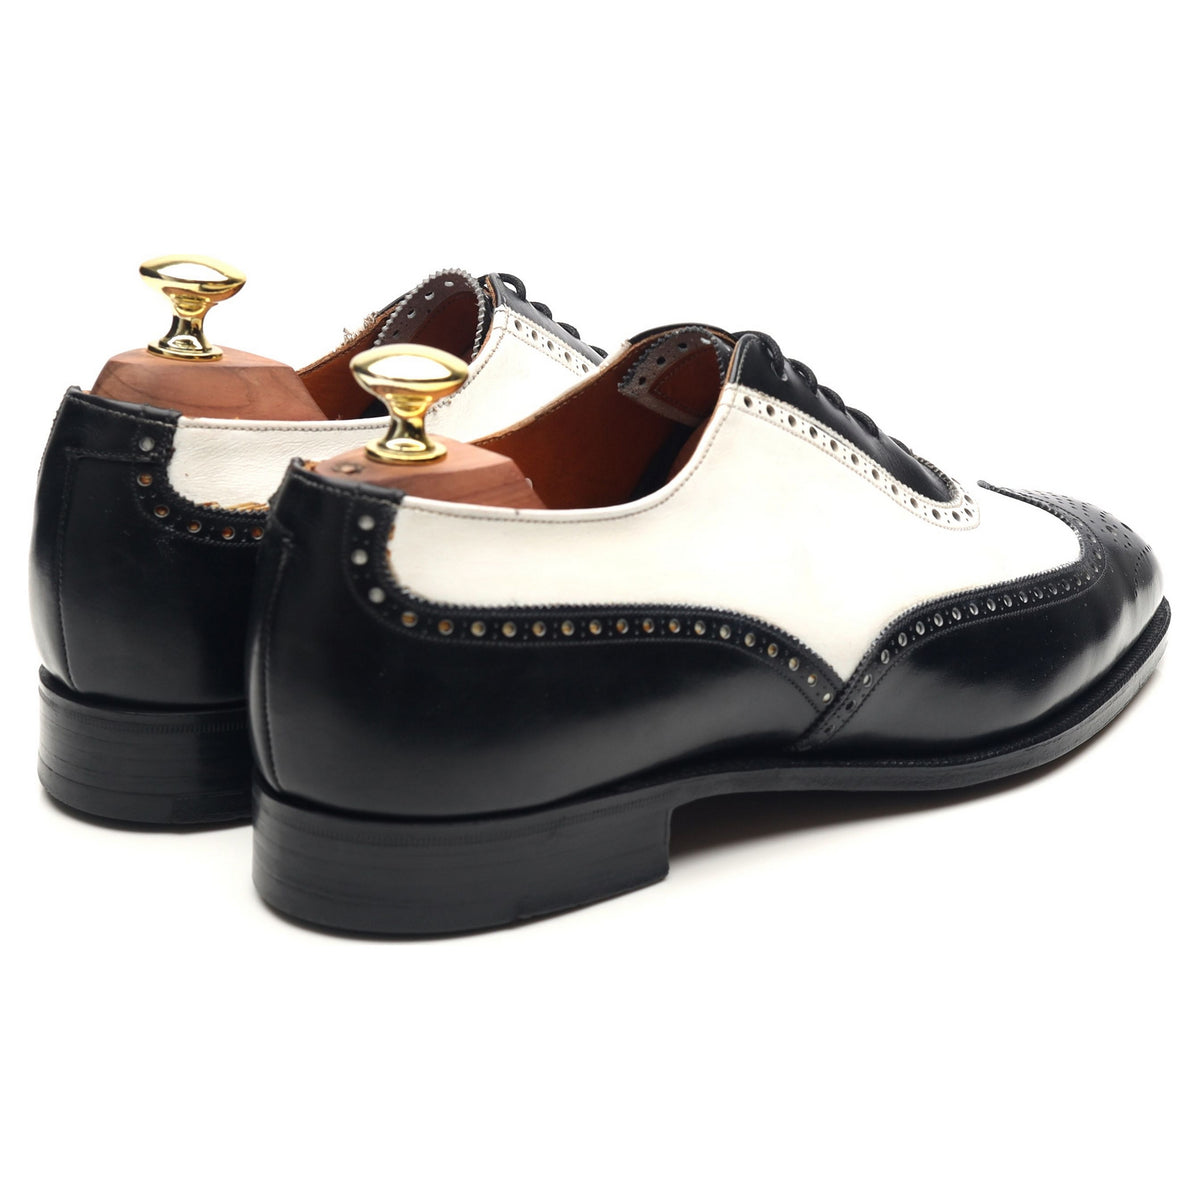 Vintage Two Tone Black White Leather Brogues UK 7 EE